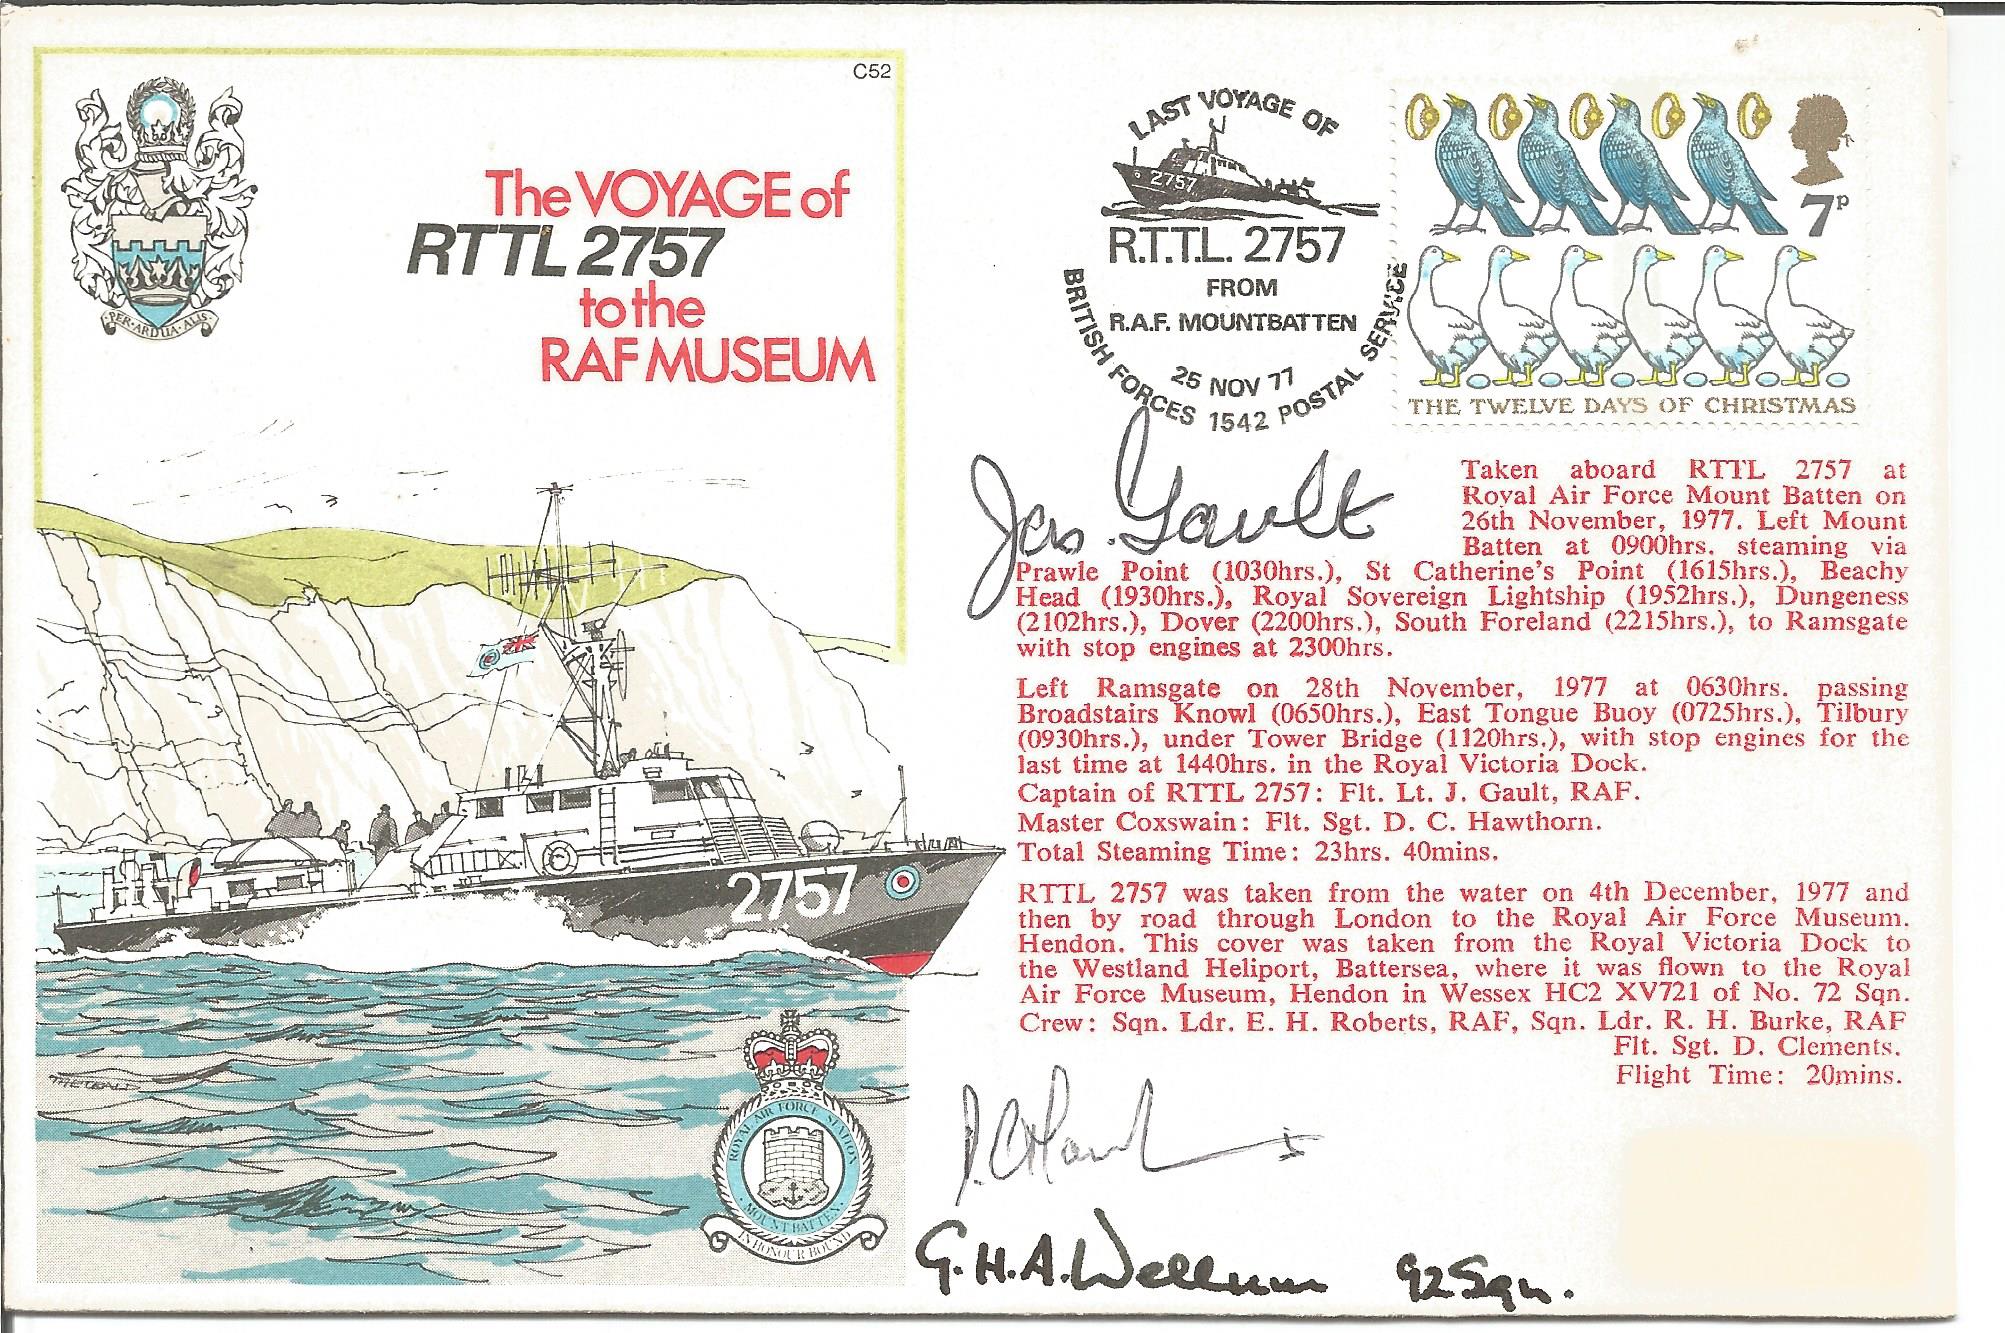 Geoffrey Wellum 92 Sqdn, J Gault and D Hawthorn signed The Voyage of RTTL 2757 to the RAF Museum